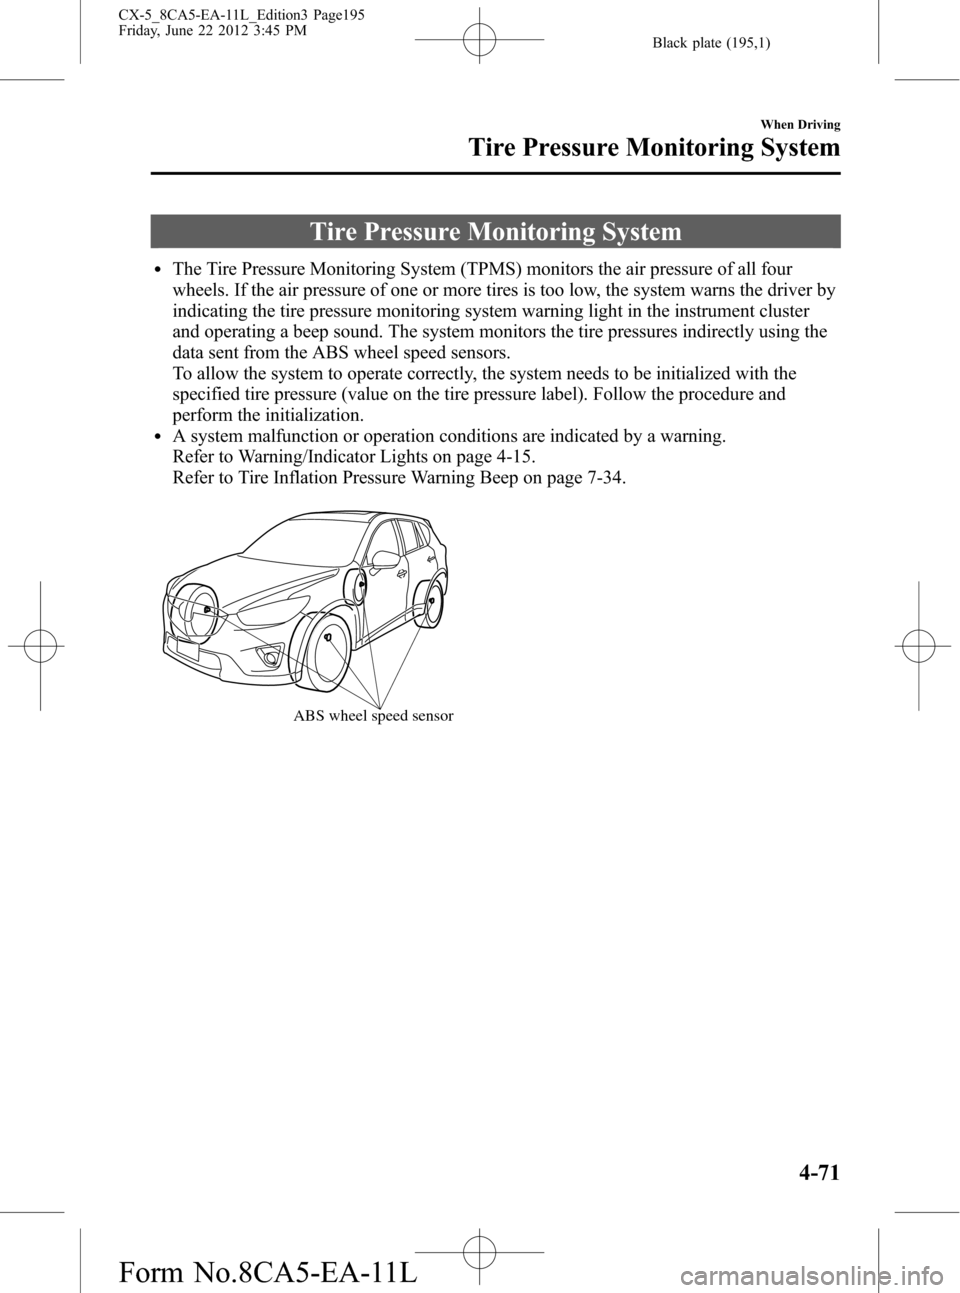 MAZDA MODEL CX-5 2013  Owners Manual (in English) Black plate (195,1)
Tire Pressure Monitoring System
lThe Tire Pressure Monitoring System (TPMS) monitors the air pressure of all four
wheels. If the air pressure of one or more tires is too low, the s